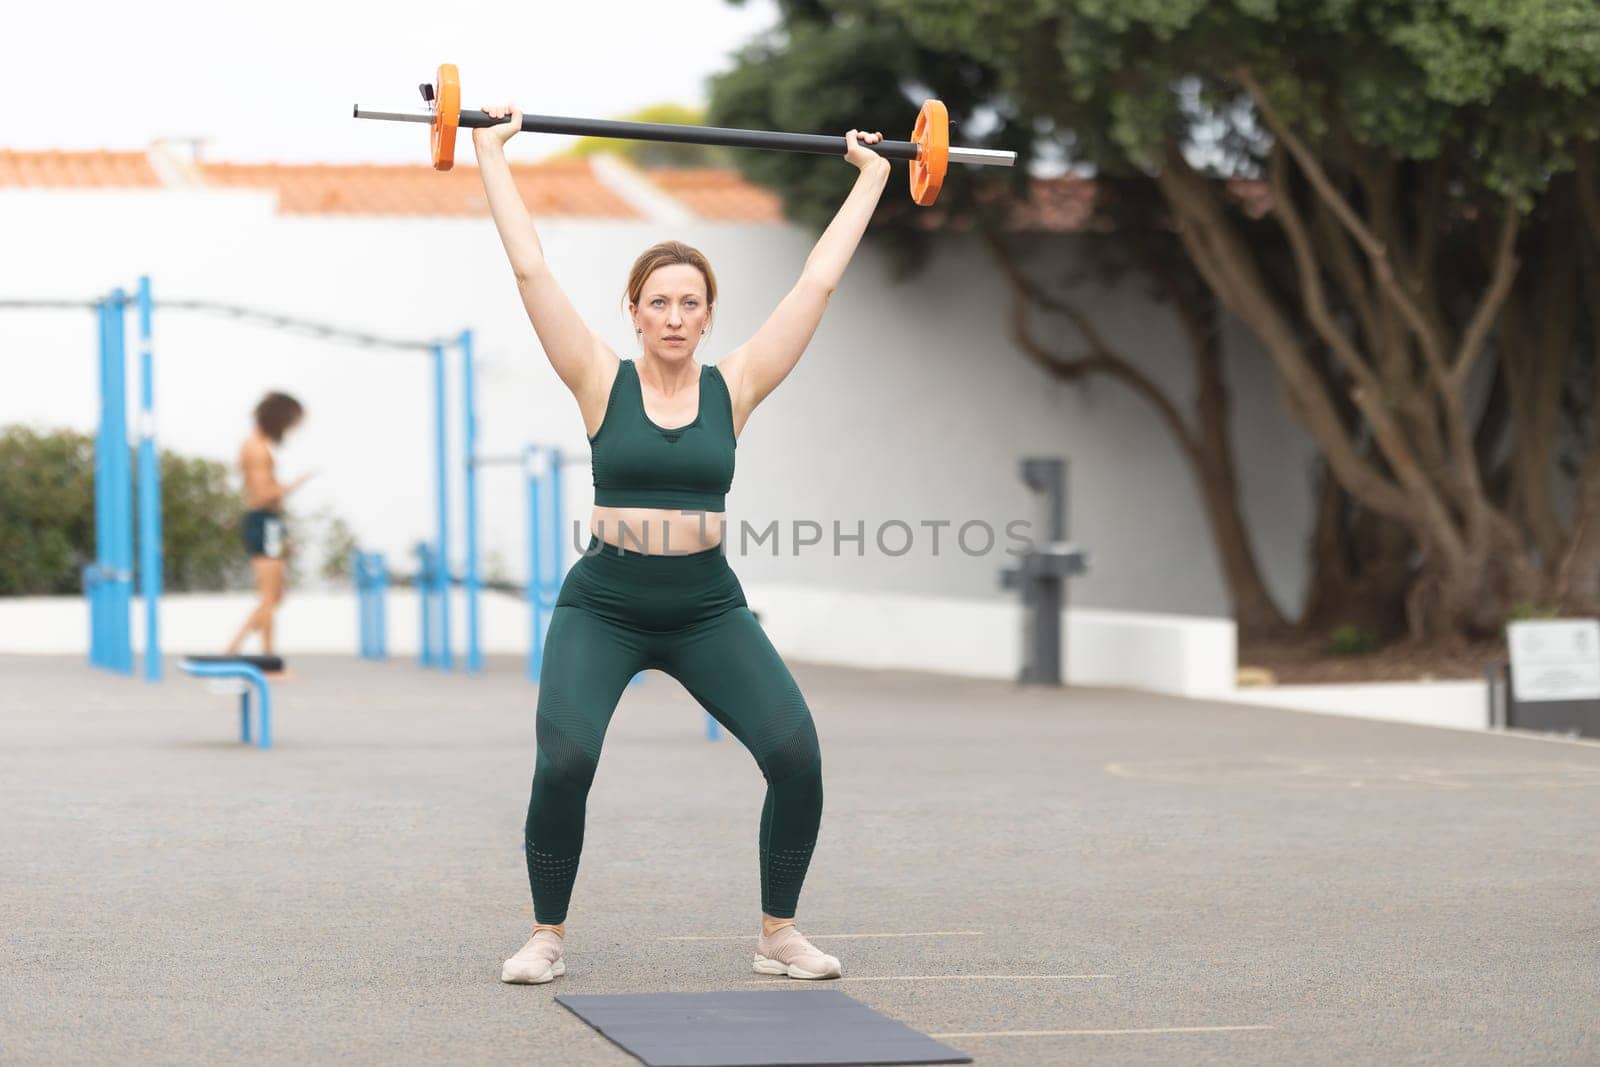 Adult sportive woman lifting a dumbbell on the outdoors sports ground. Mid shot